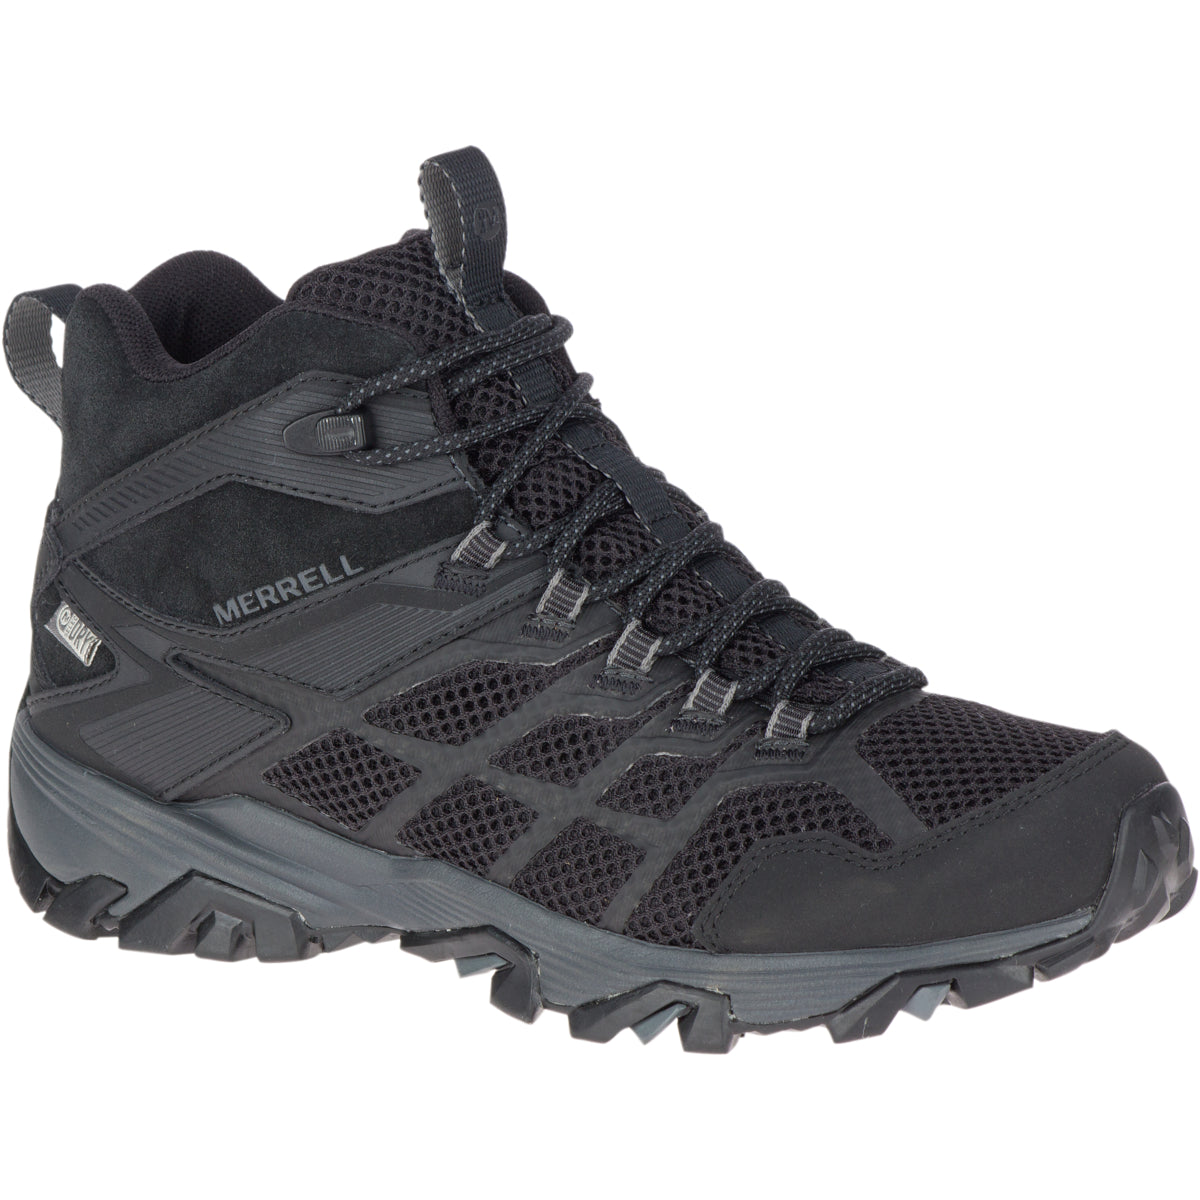 Merrell Men's Moab FST Ice + Thermo